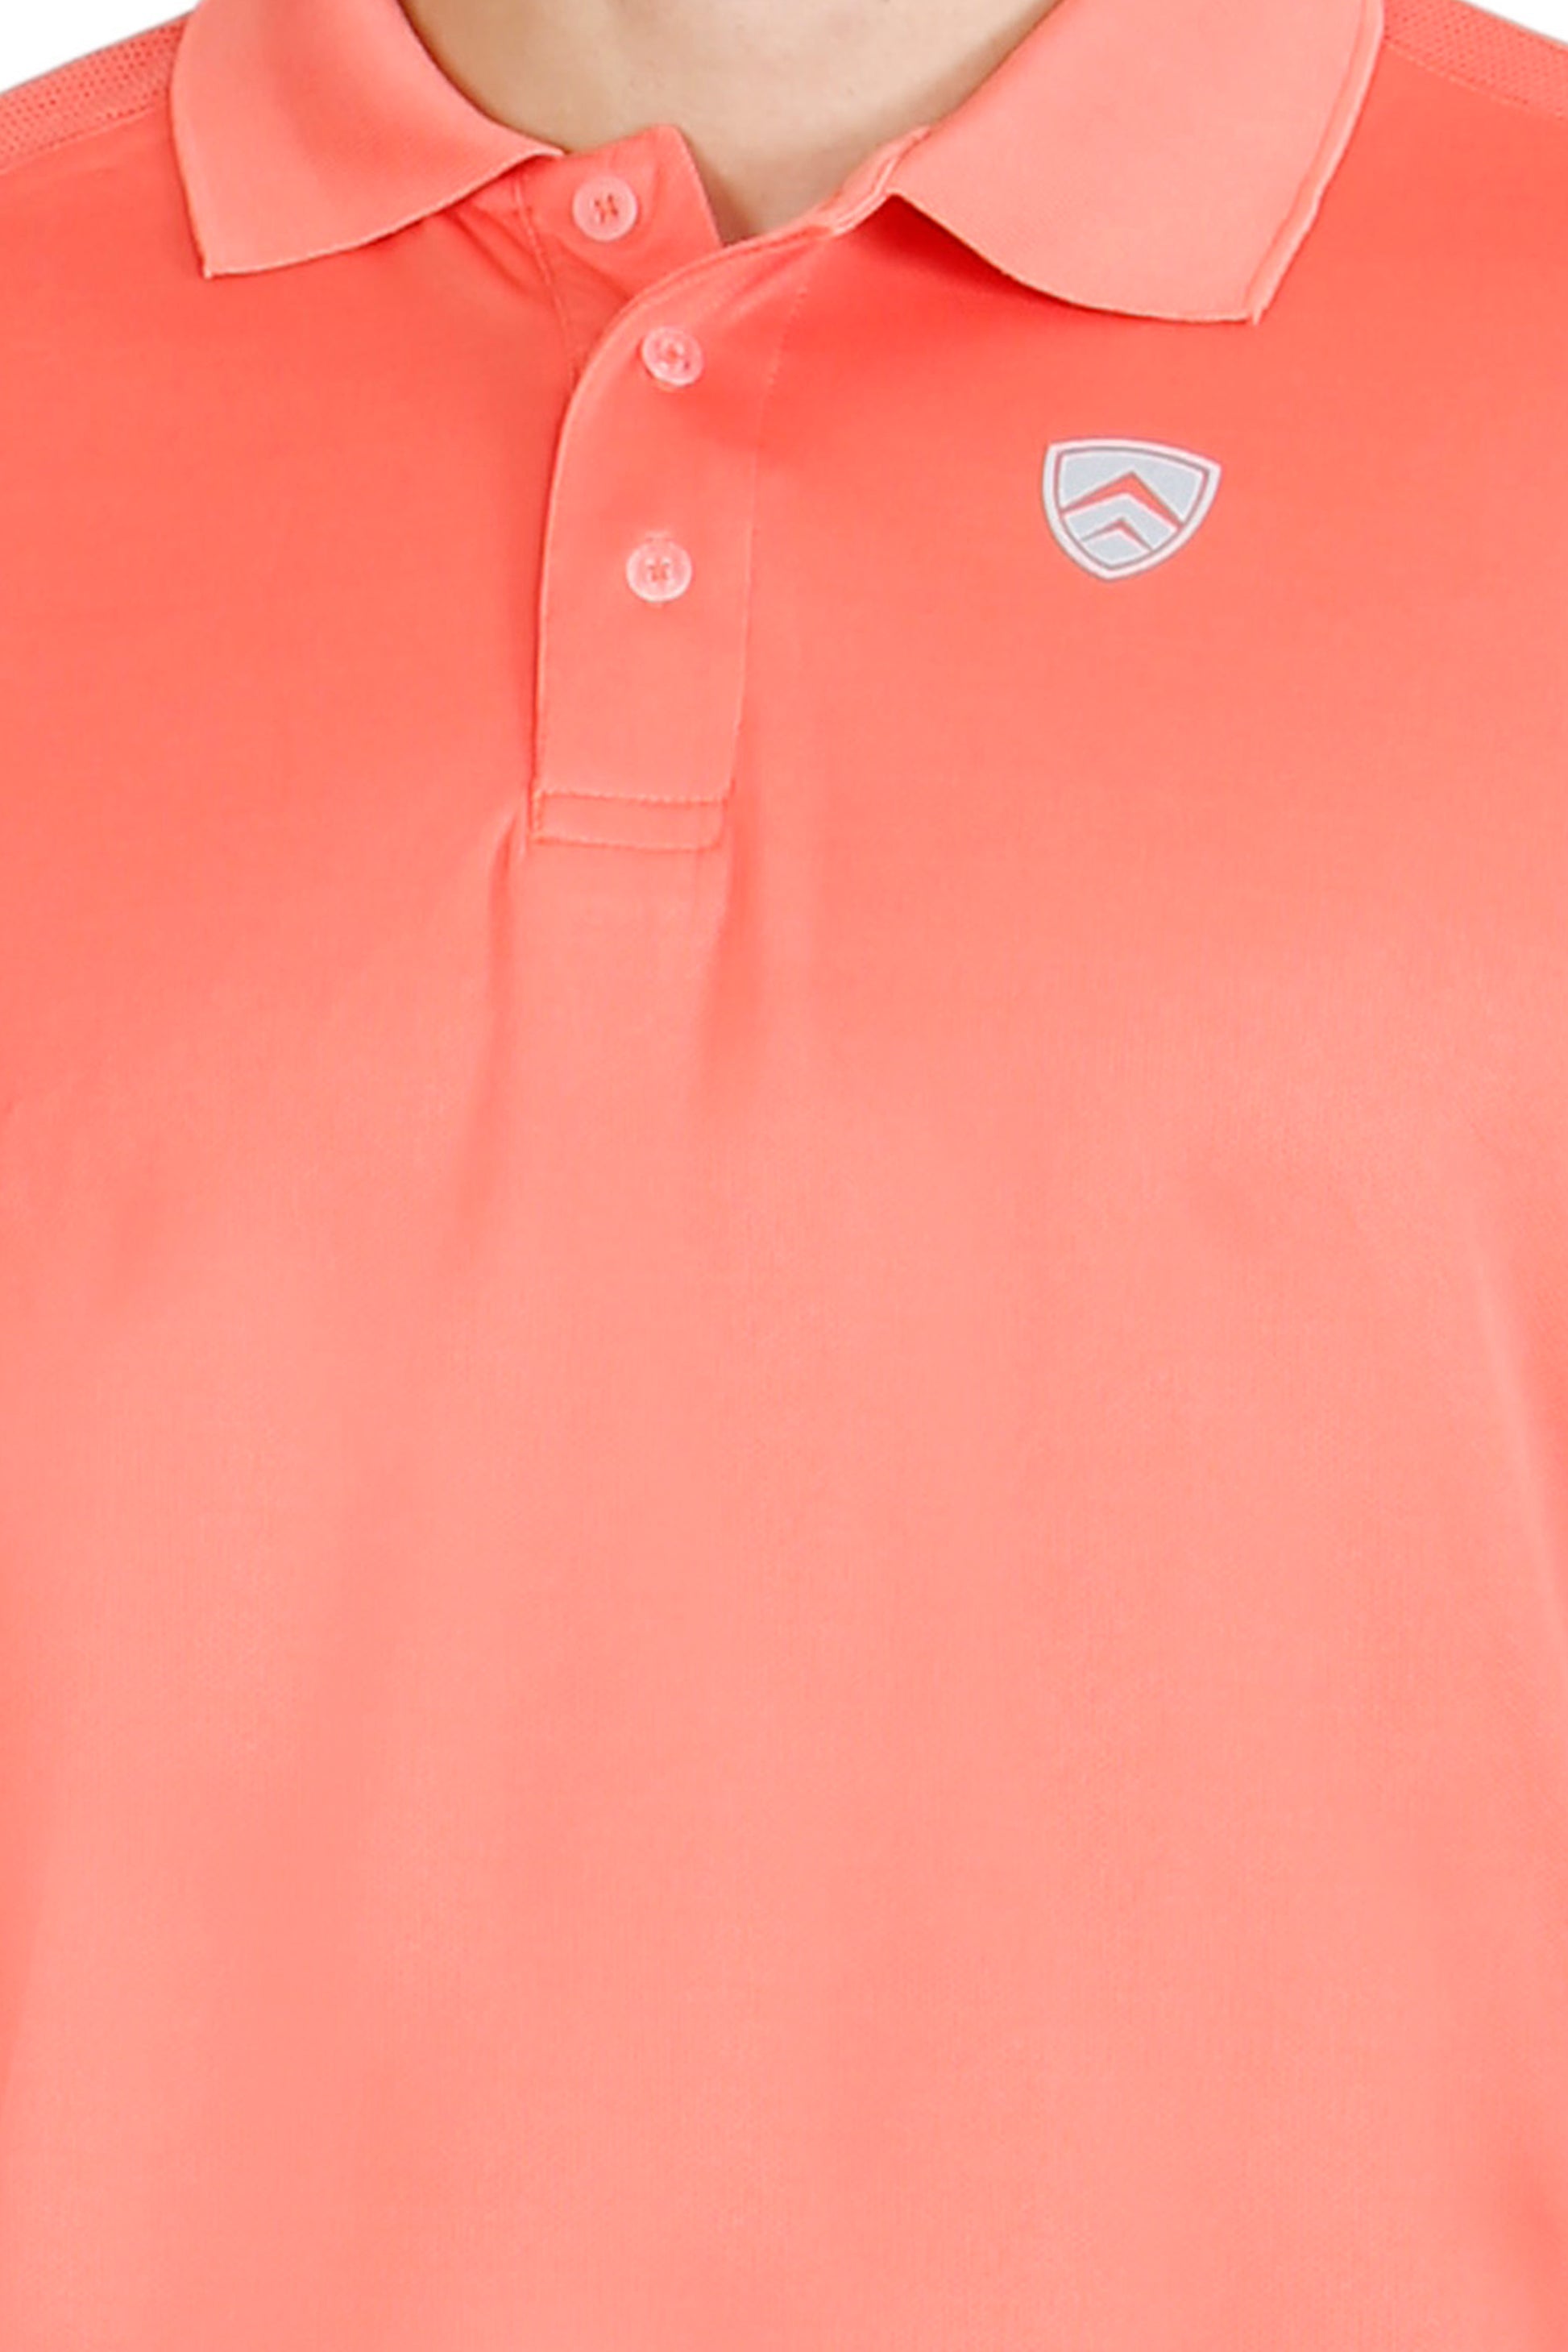 ARMR Men’s Living Coral SPORT PERFORMANCE POLO